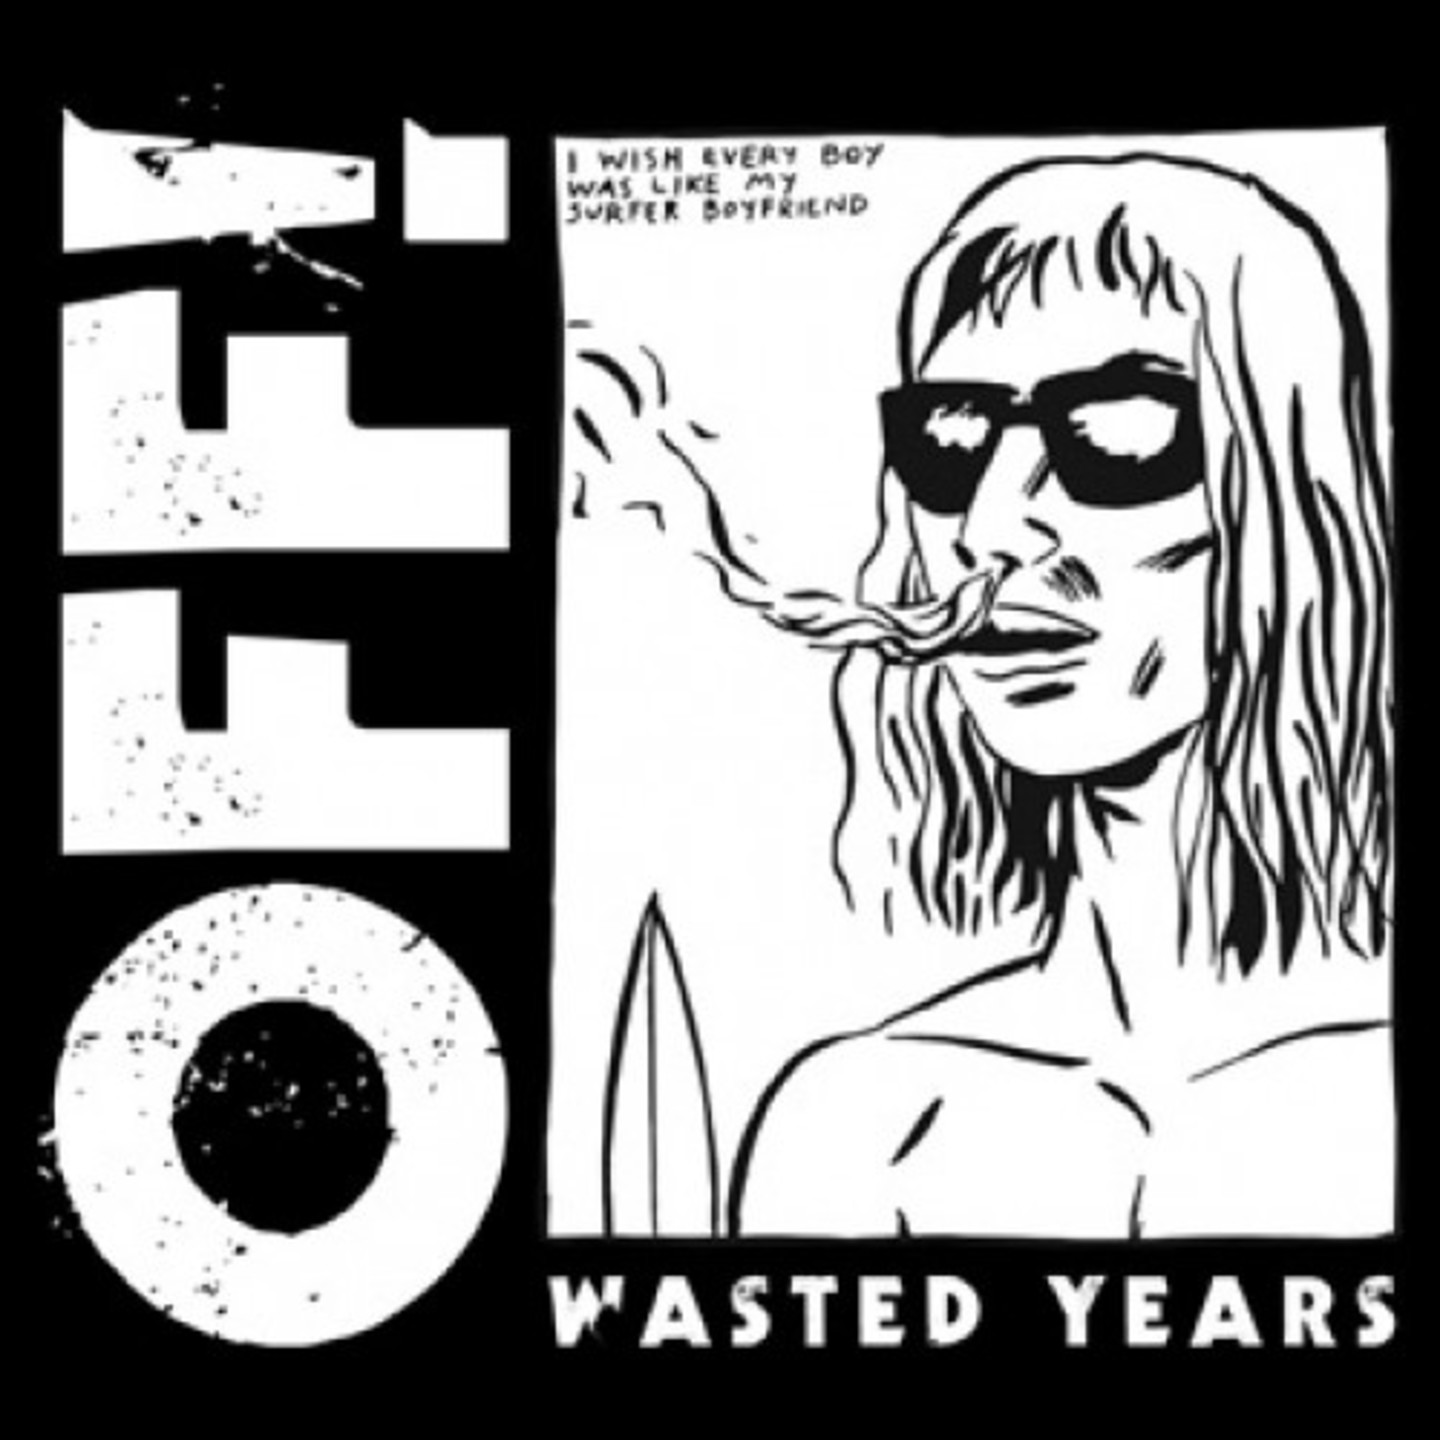 OFF - Wasted Years LP